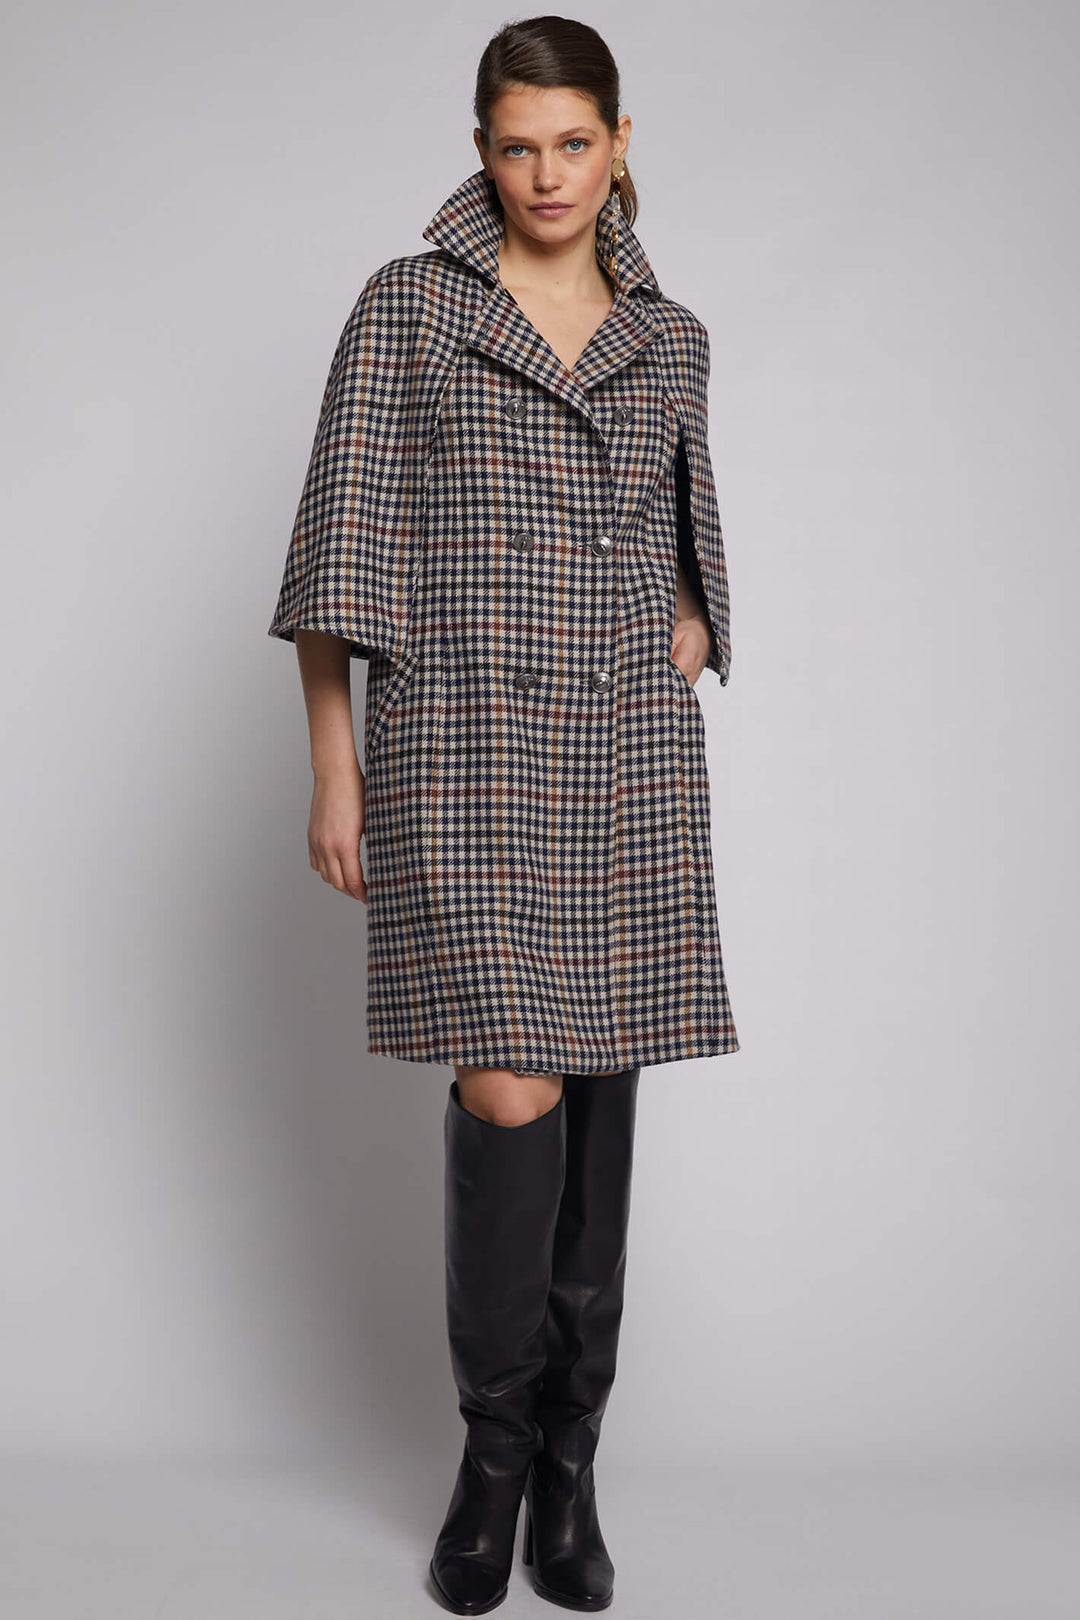 Vilagallo 30748 Navy Dogtooth Print Wool Blend Coat - Experience Boutique